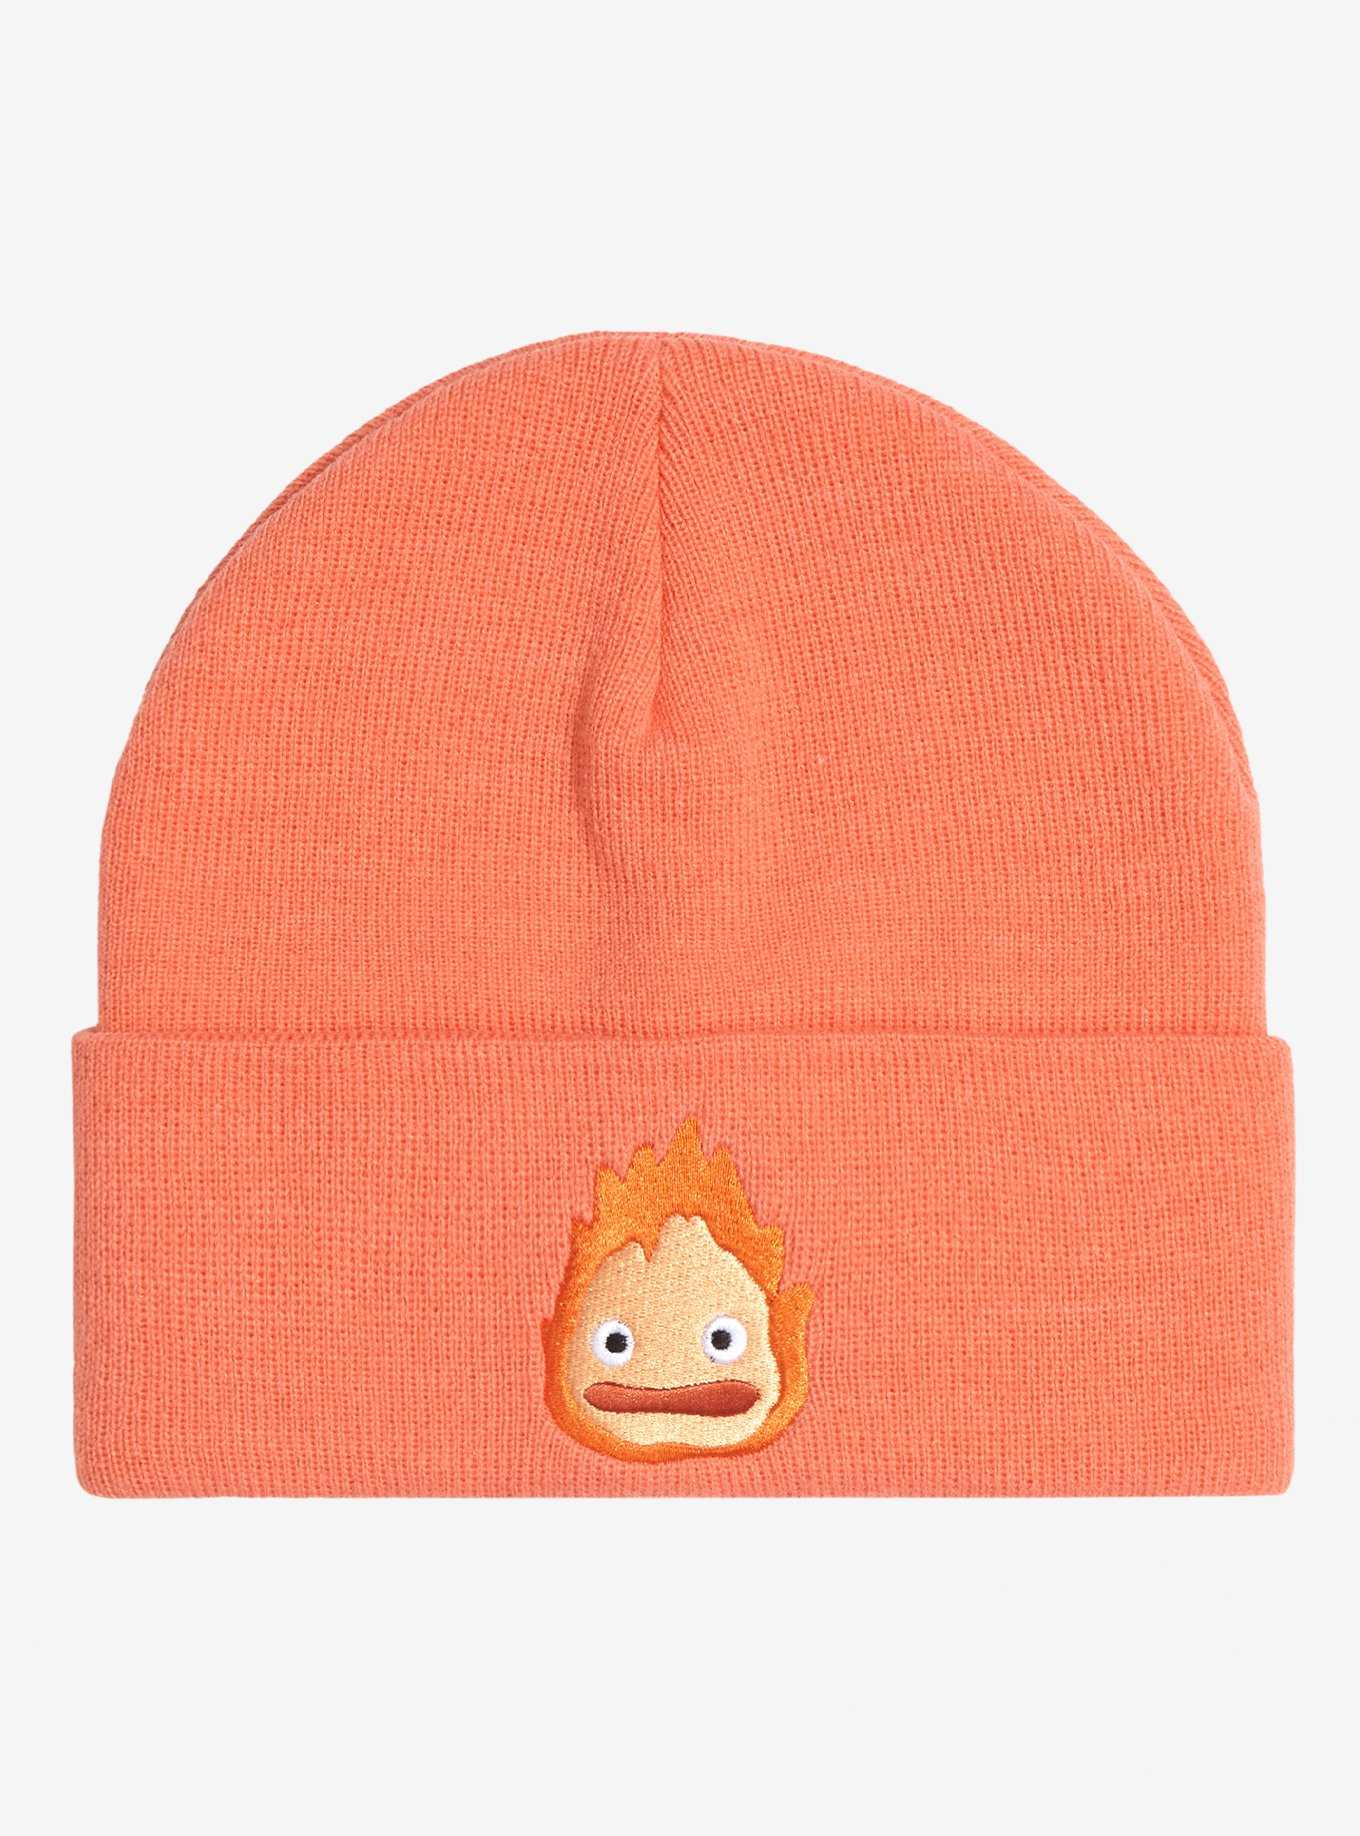 Cool Beanies: BoxLunch Trendy Pop & Beanies Culture Slouchy, 